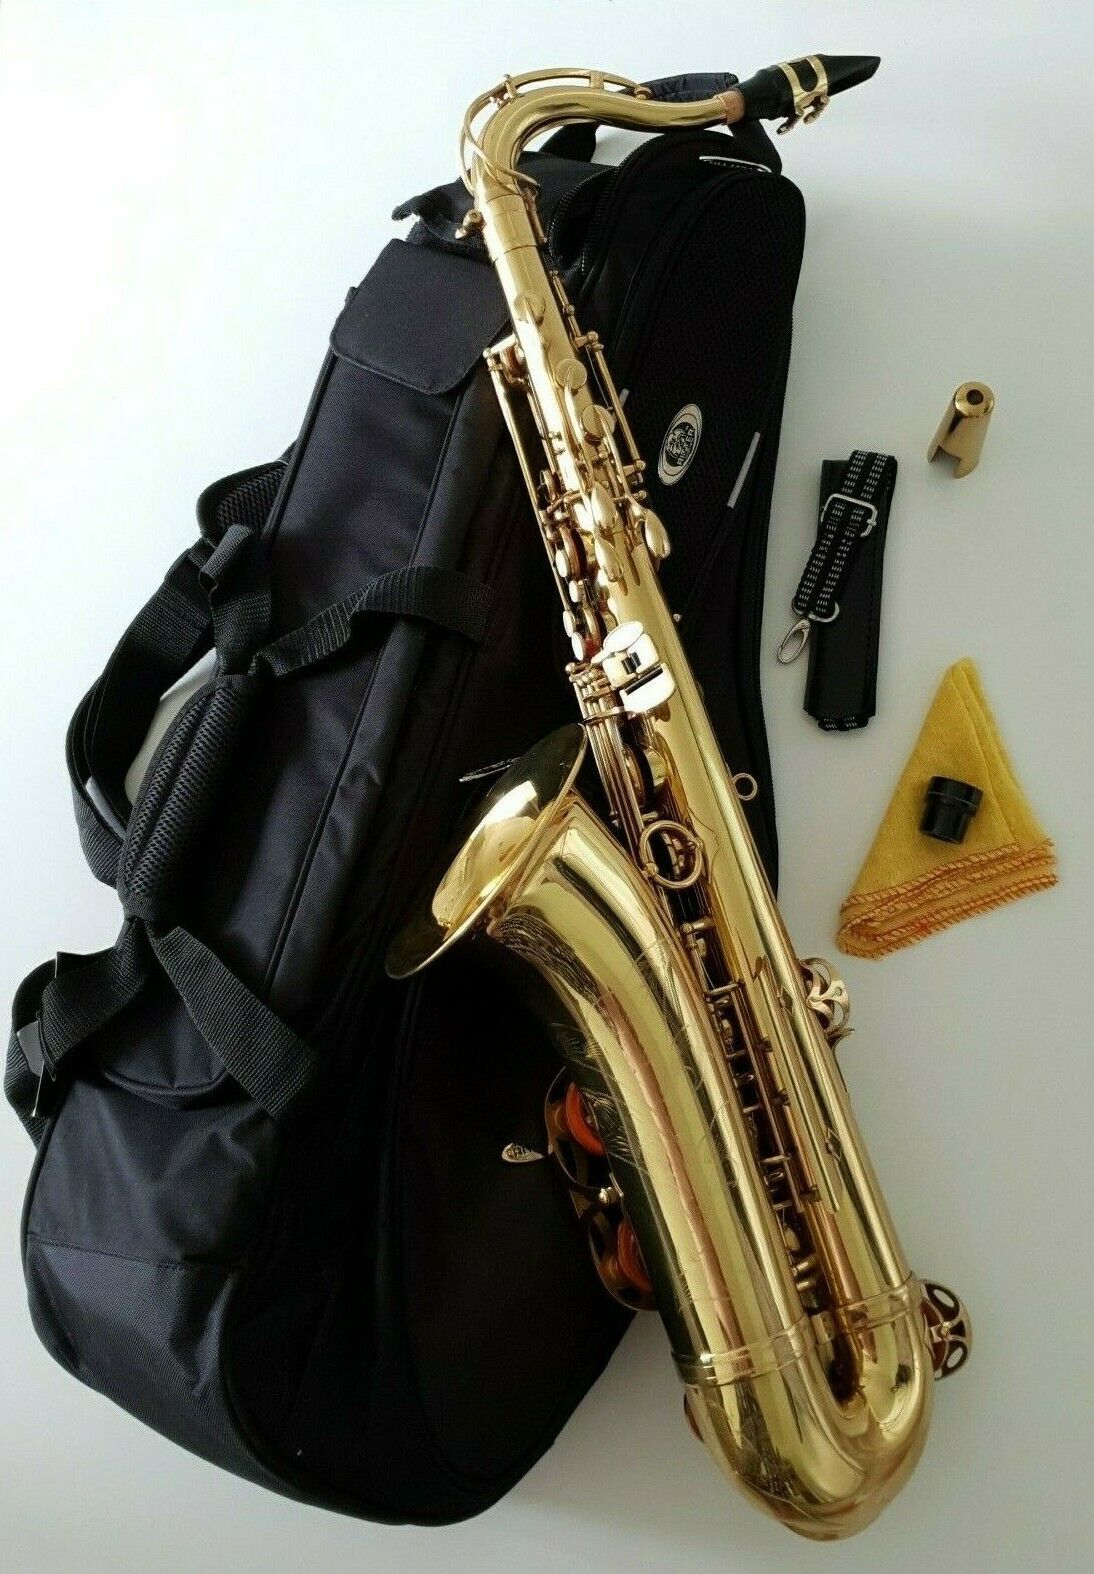 Saxophone Bb Tenor by Intermusic Gold Finish & Ritter Gig Bag - NEW OUTFIT - 09